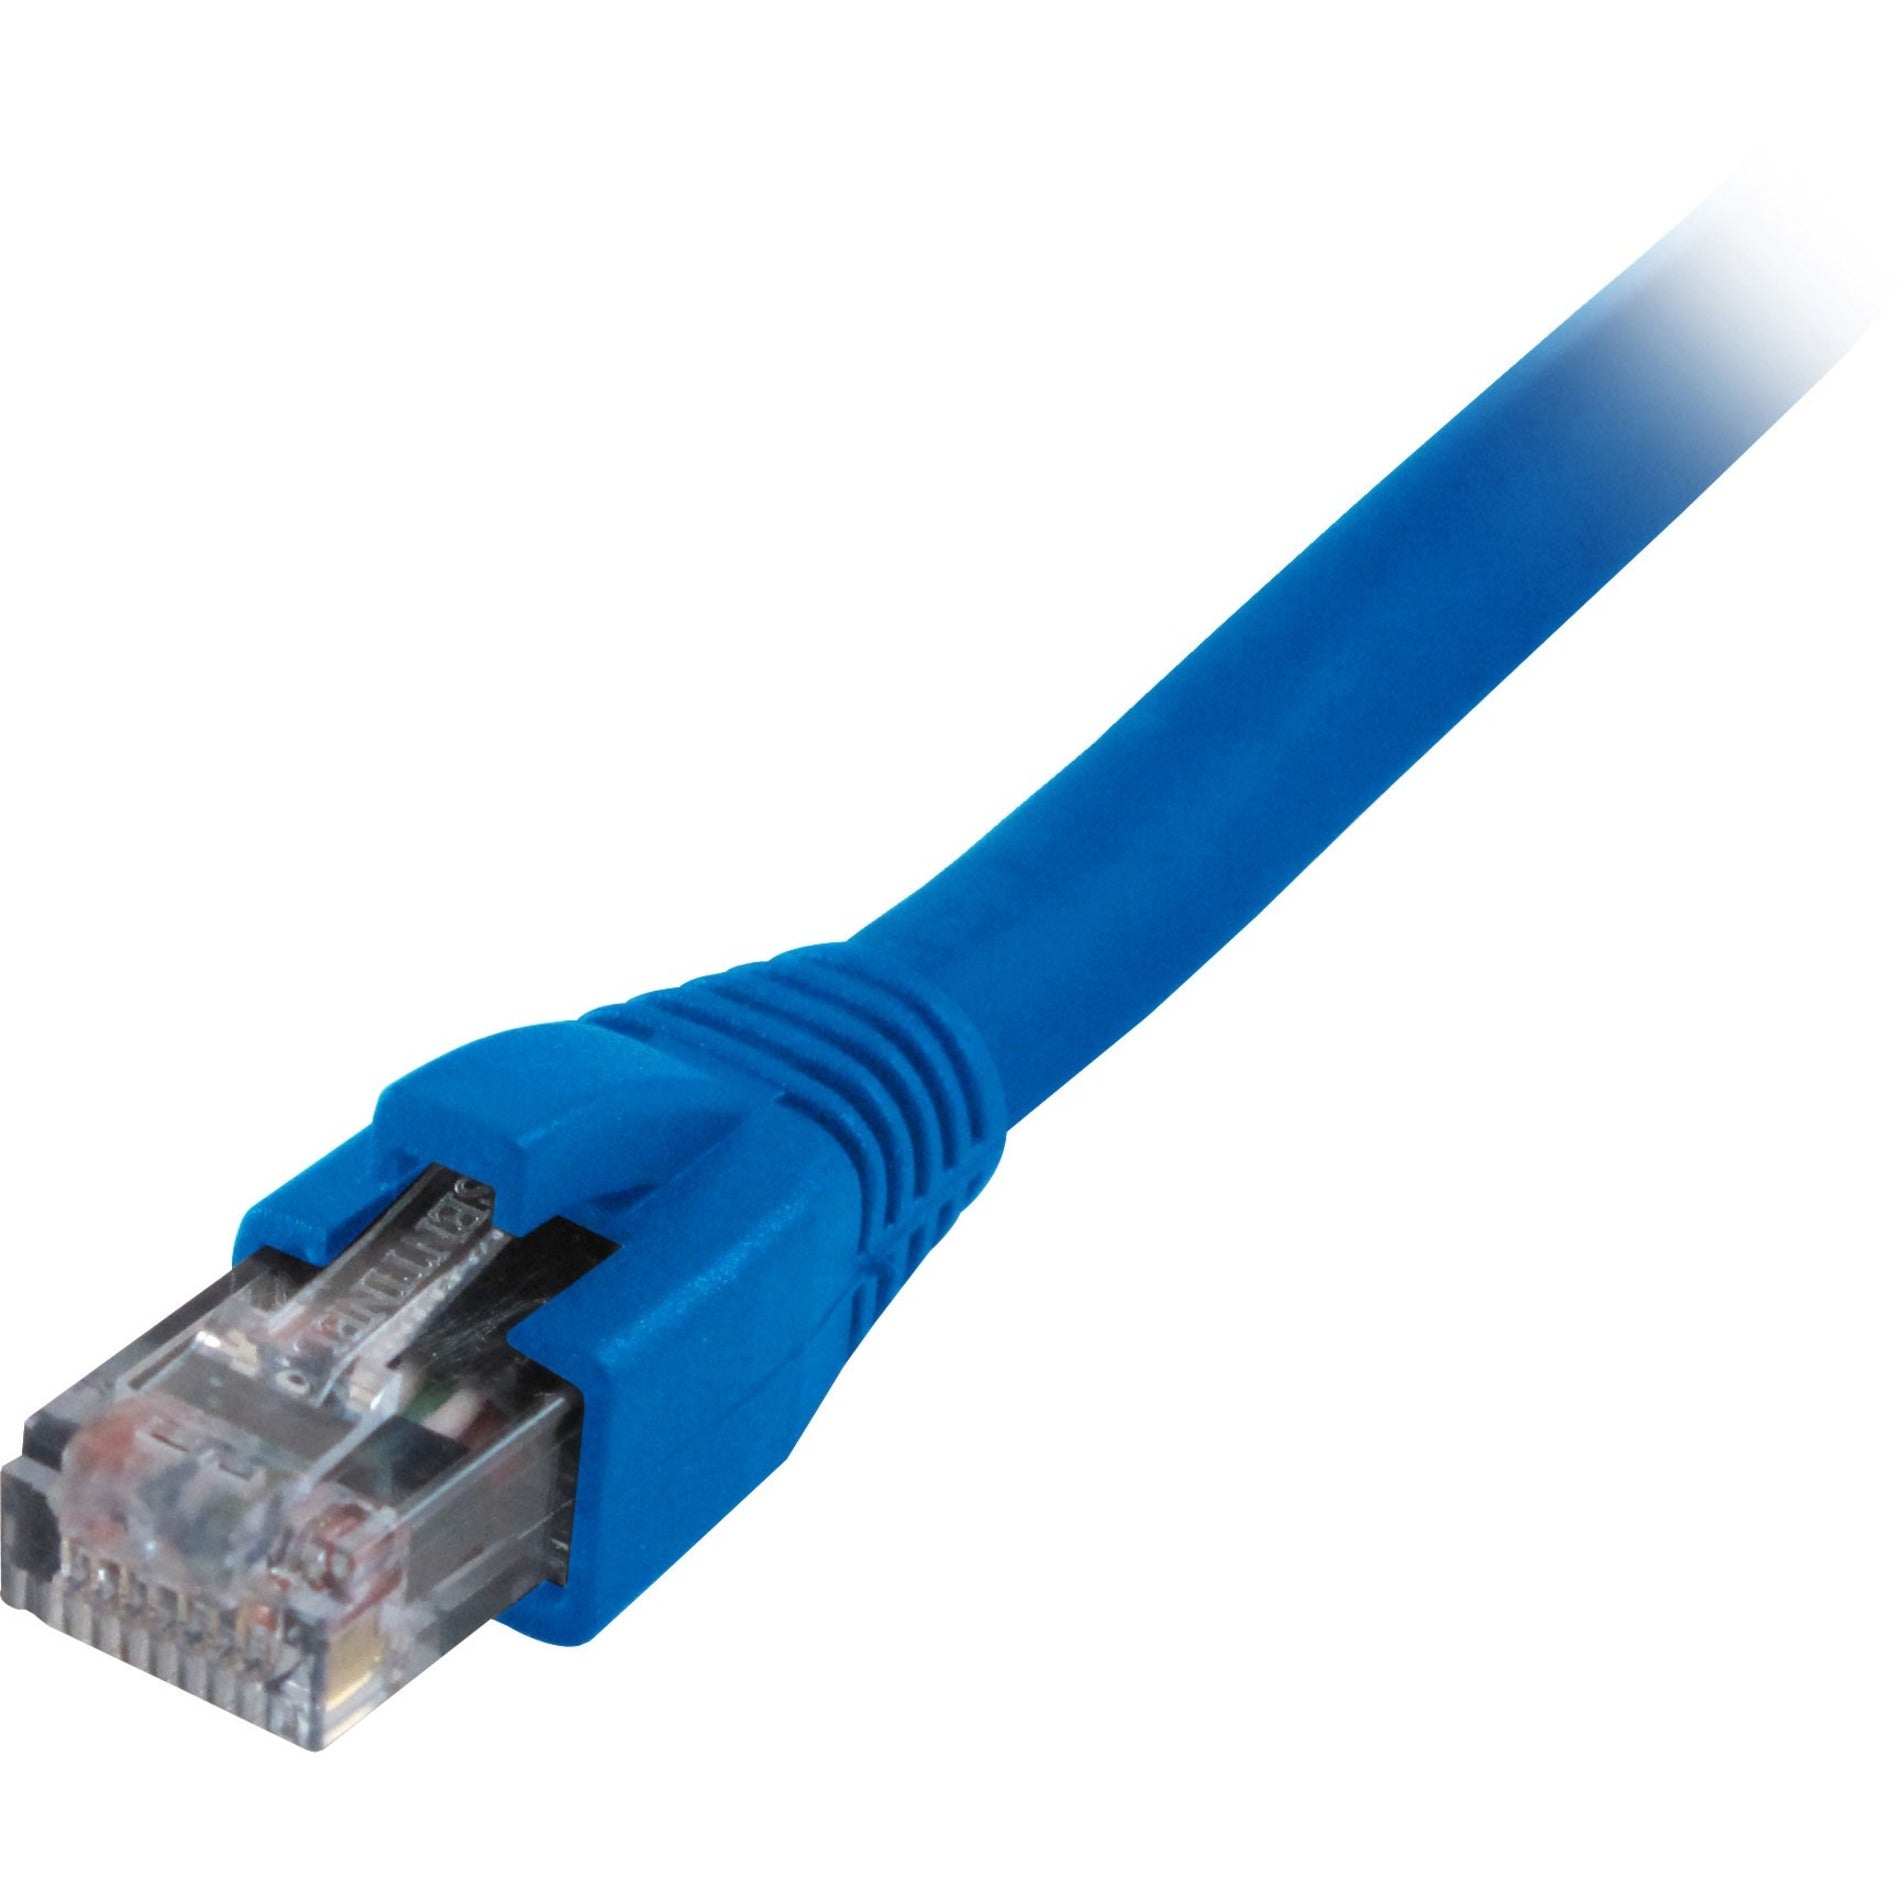 Comprehensive CAT6-100BLU Cat6 550 Mhz Snagless Patch Cable 100ft Blue, Molded, Strain Relief, Stranded, Booted, 1 Gbit/s Data Transfer Rate